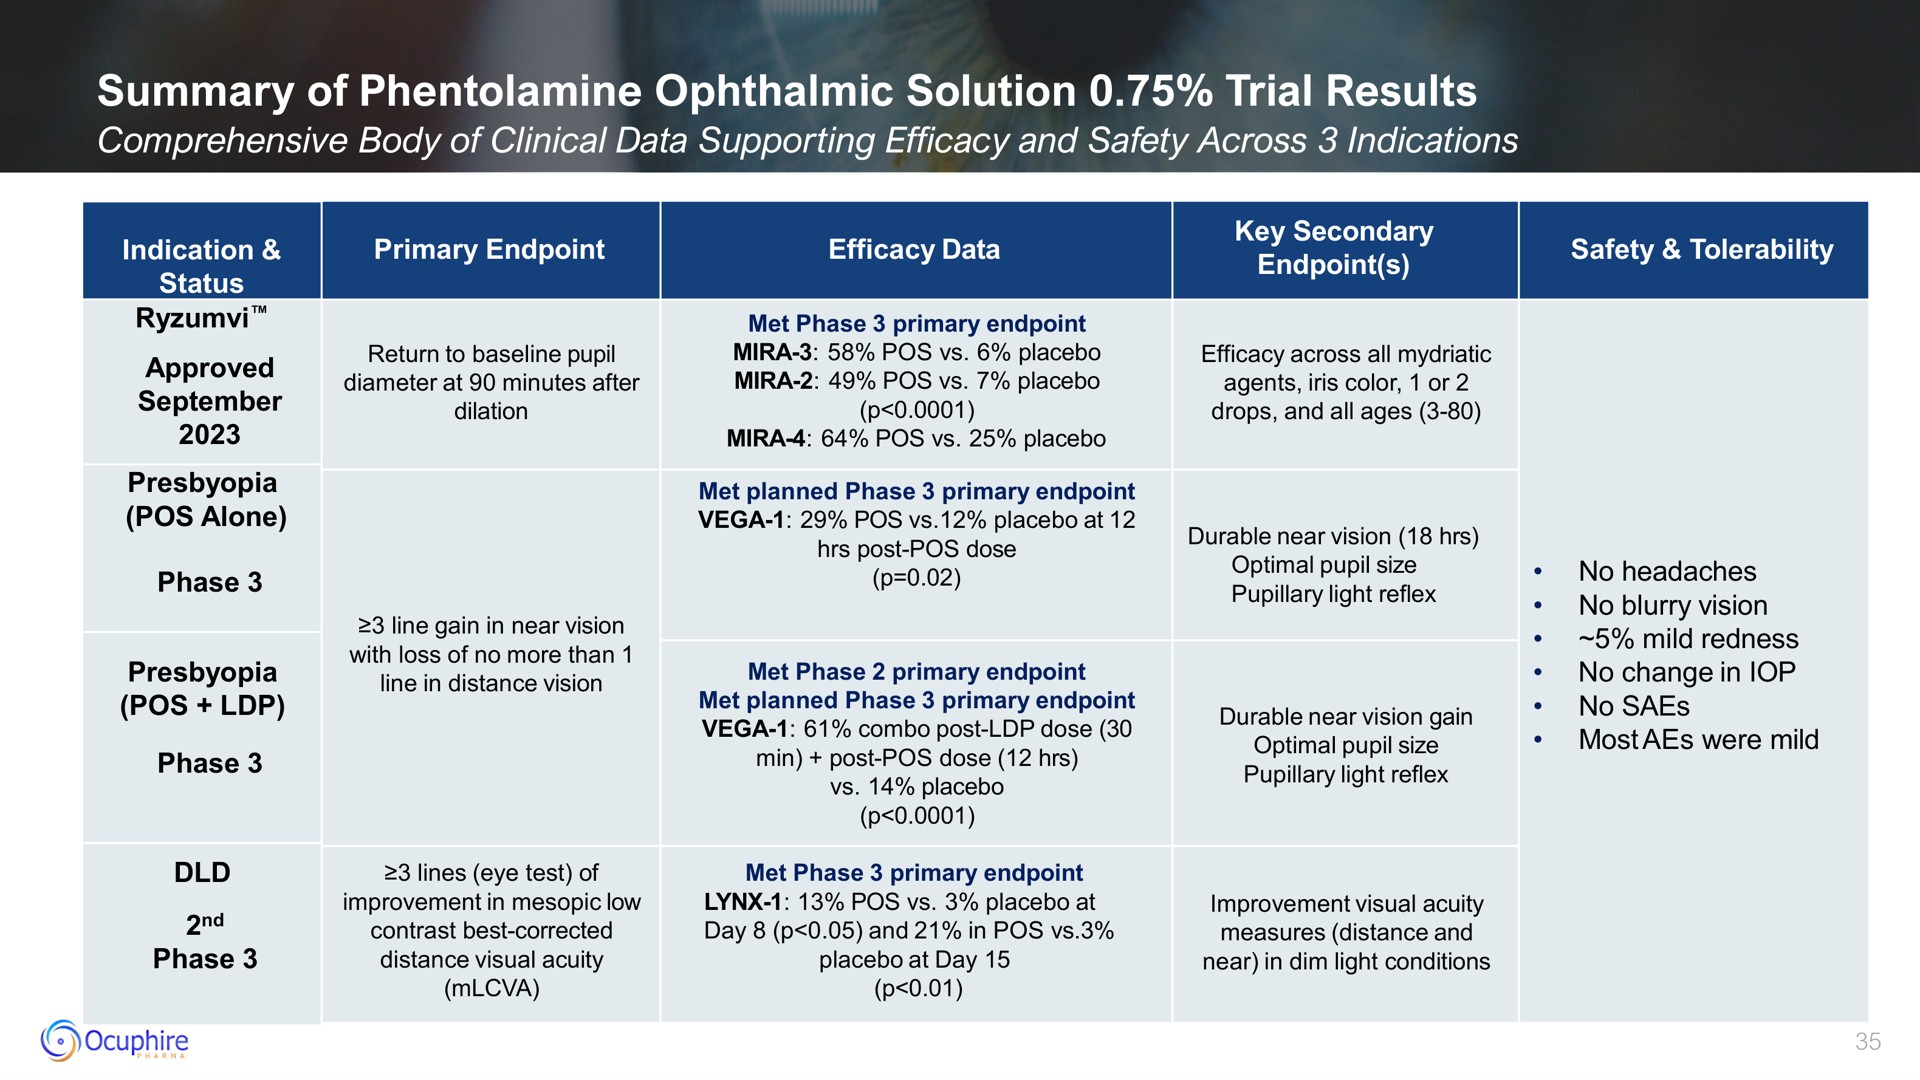 summary of ophthalmic solution trial results post dose bree nea mild | Ocuphire Pharma